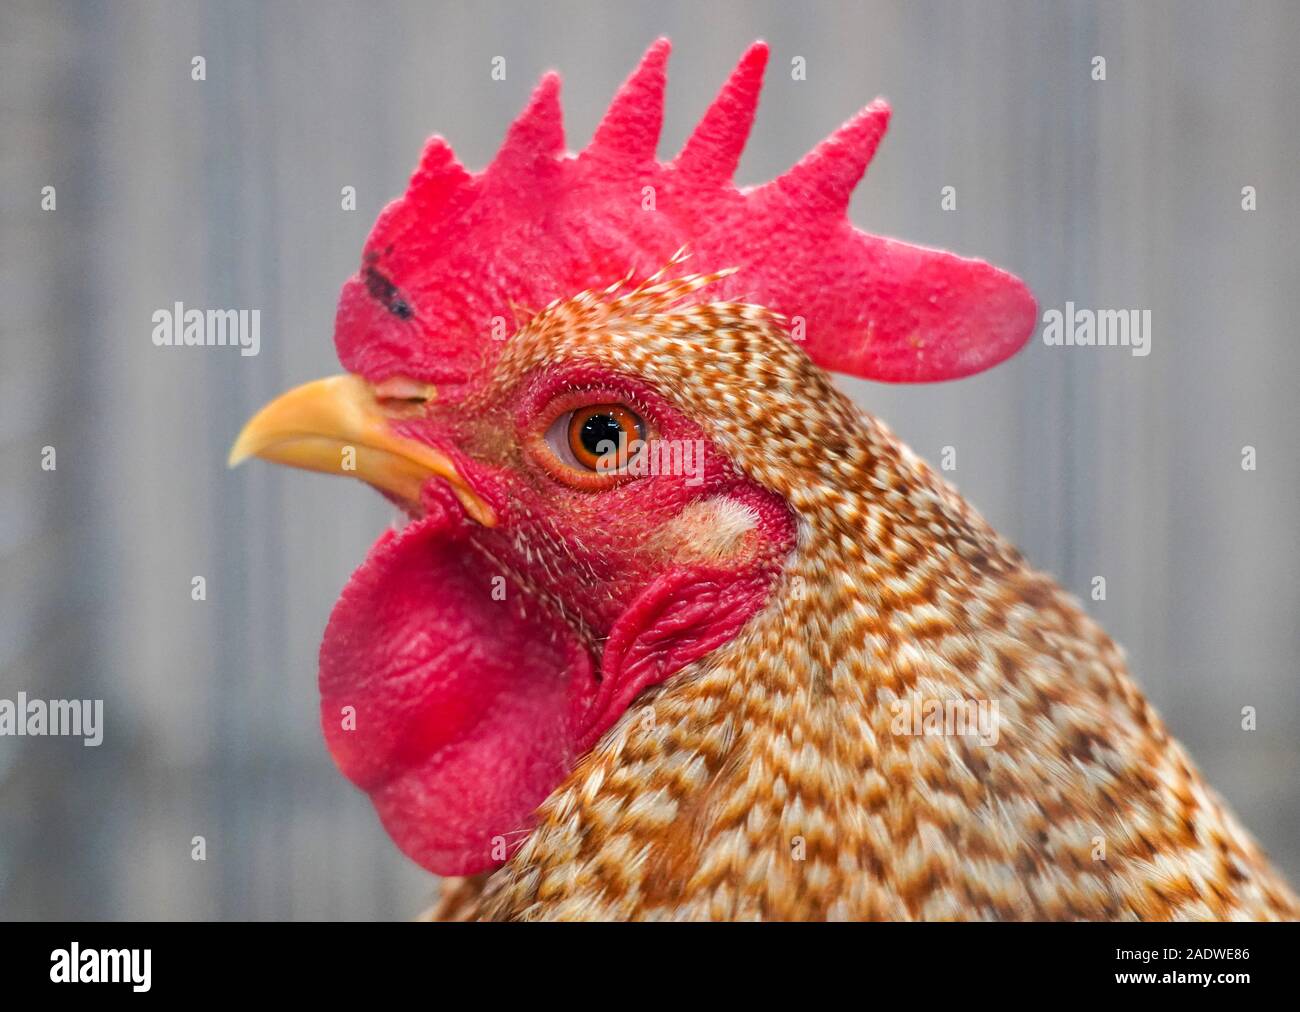 Leipzig, Germany. 05th Dec, 2019. A chicken of the breed 'Bielefelder Zwerg-Kennhühner' is in an exhibition hall for the Lipsia. According to the organizer, the Lipsia is the world's largest show of purebred poultry and a platform for the exchange of information on purebred poultry breeding. 4210 breeders from all over Germany present around 46,750 animals in the exhibition halls. Credit: Peter Endig/dpa-Zentralbild/ZB/dpa/Alamy Live News Stock Photo